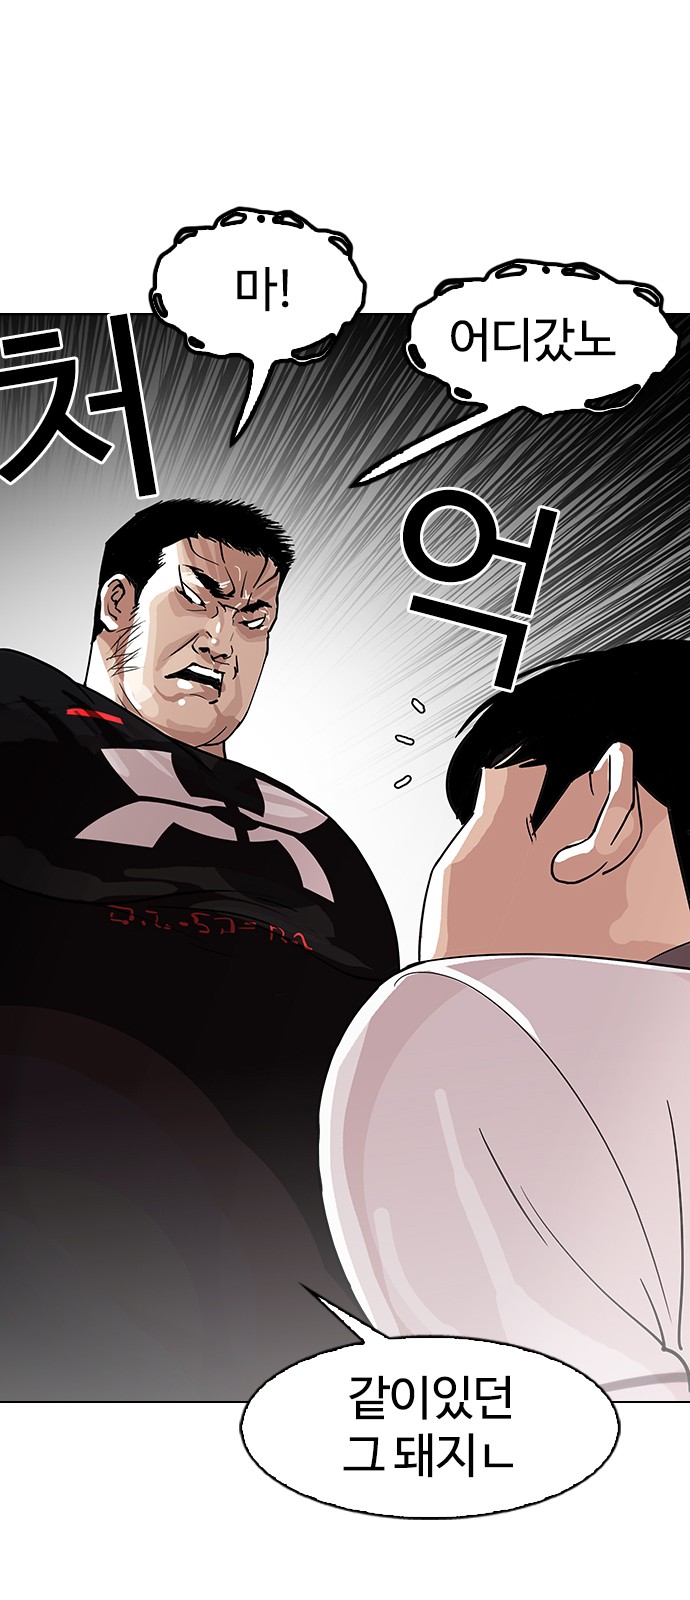 Lookism - Chapter 145 - Page 3